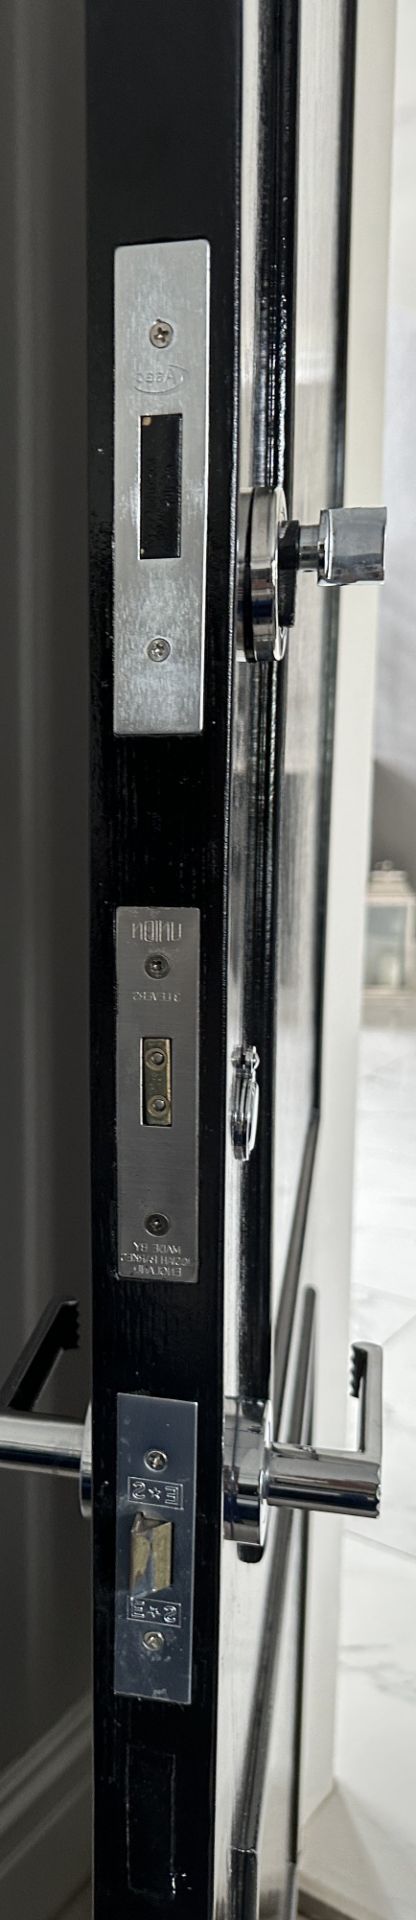 1 x SOLID OAK Fire Door In Black Gloss And Stainless Steel Hardware - Image 3 of 4